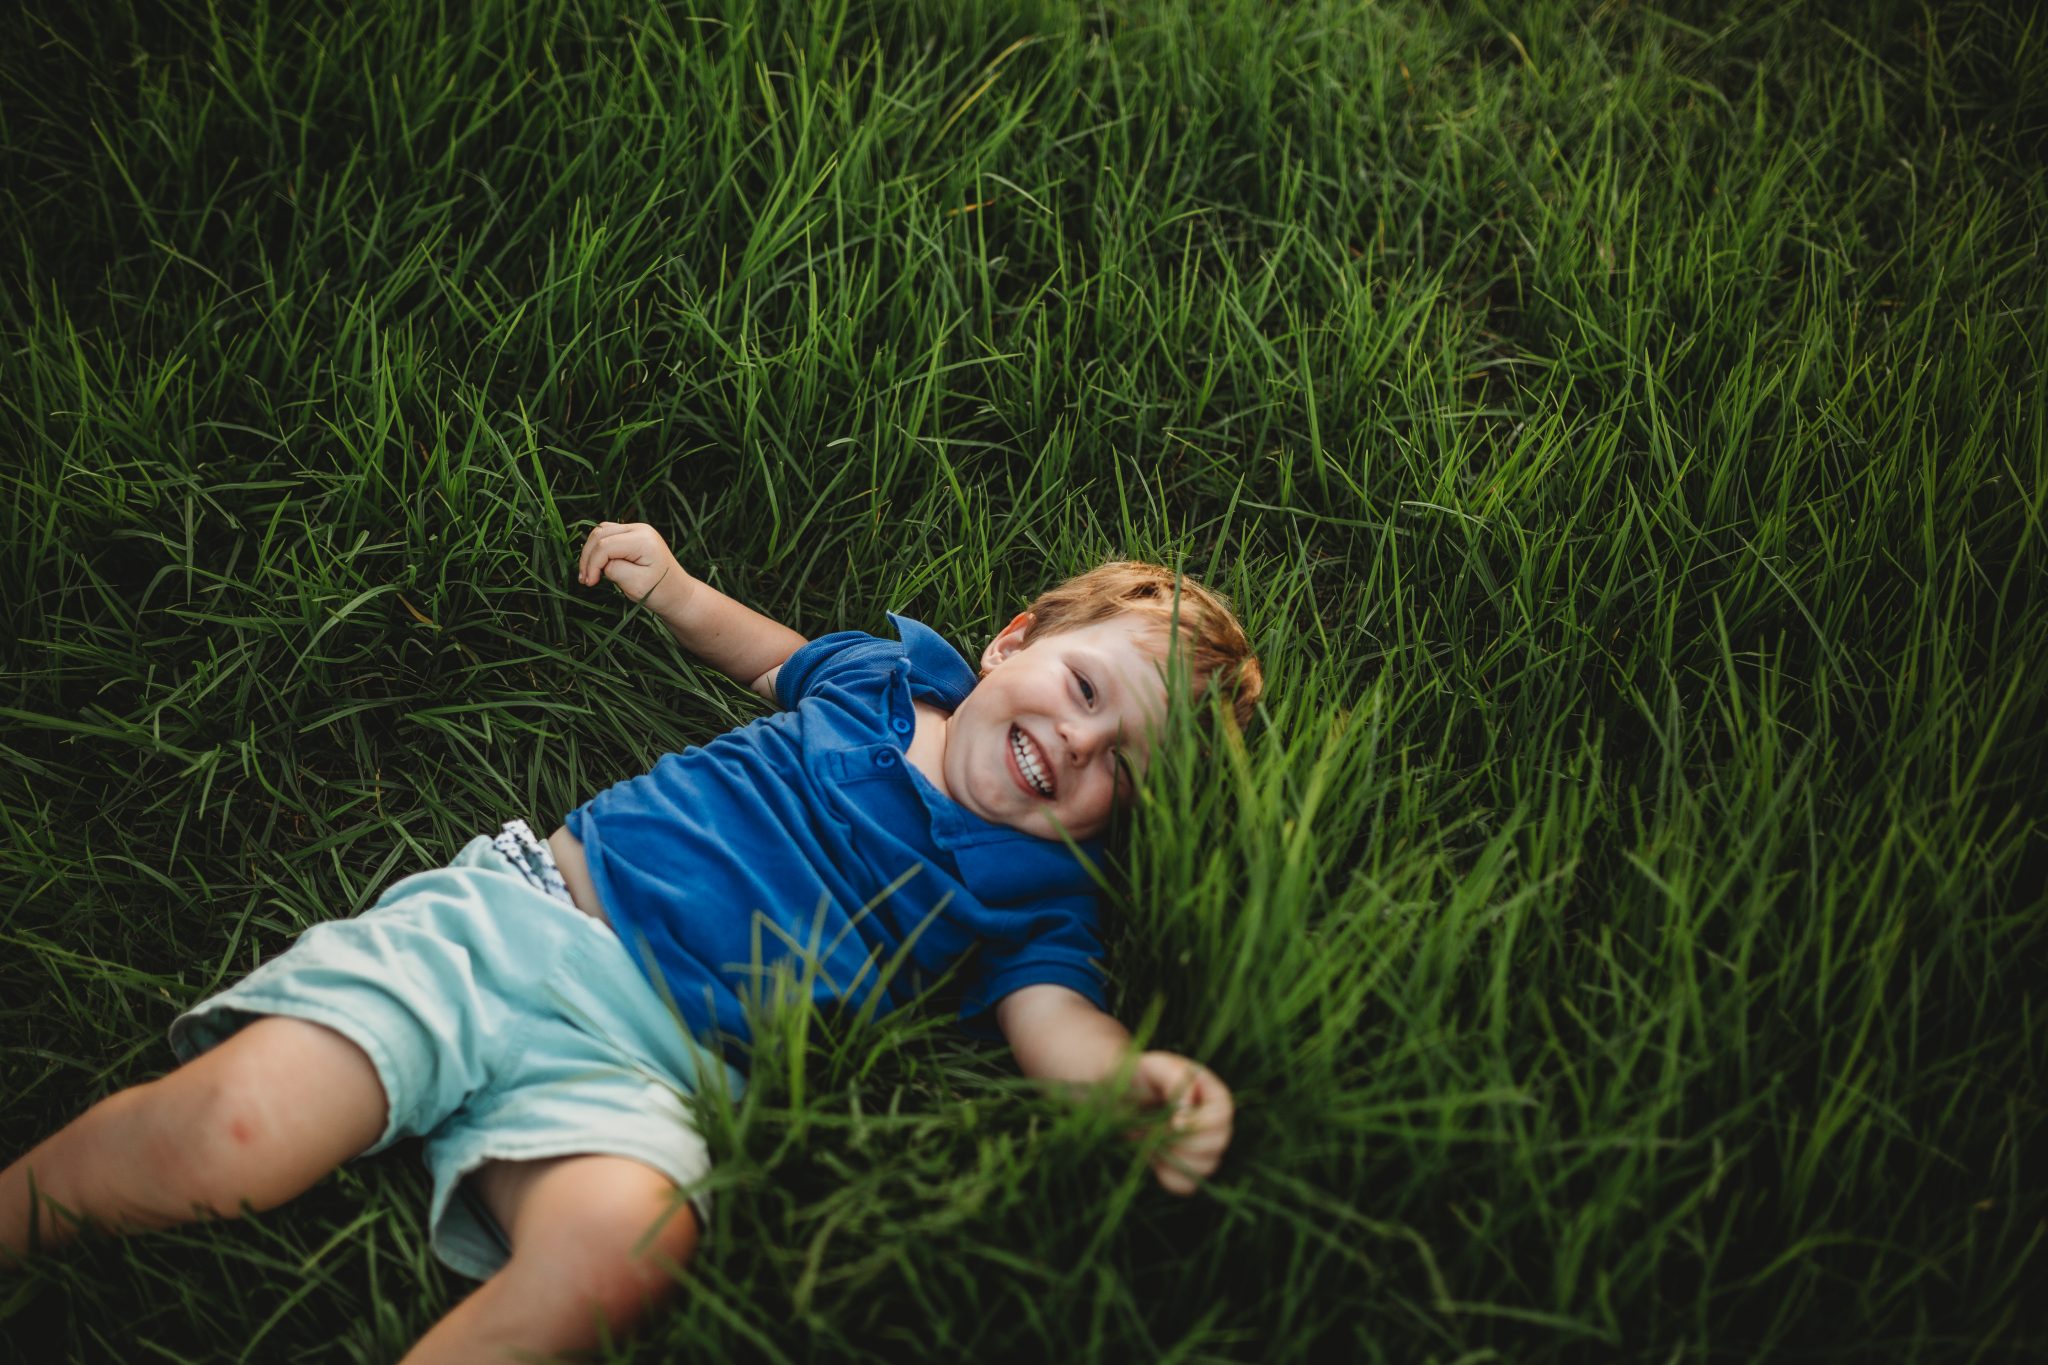 Young boy in blue shirt, laying in green grass and smiling